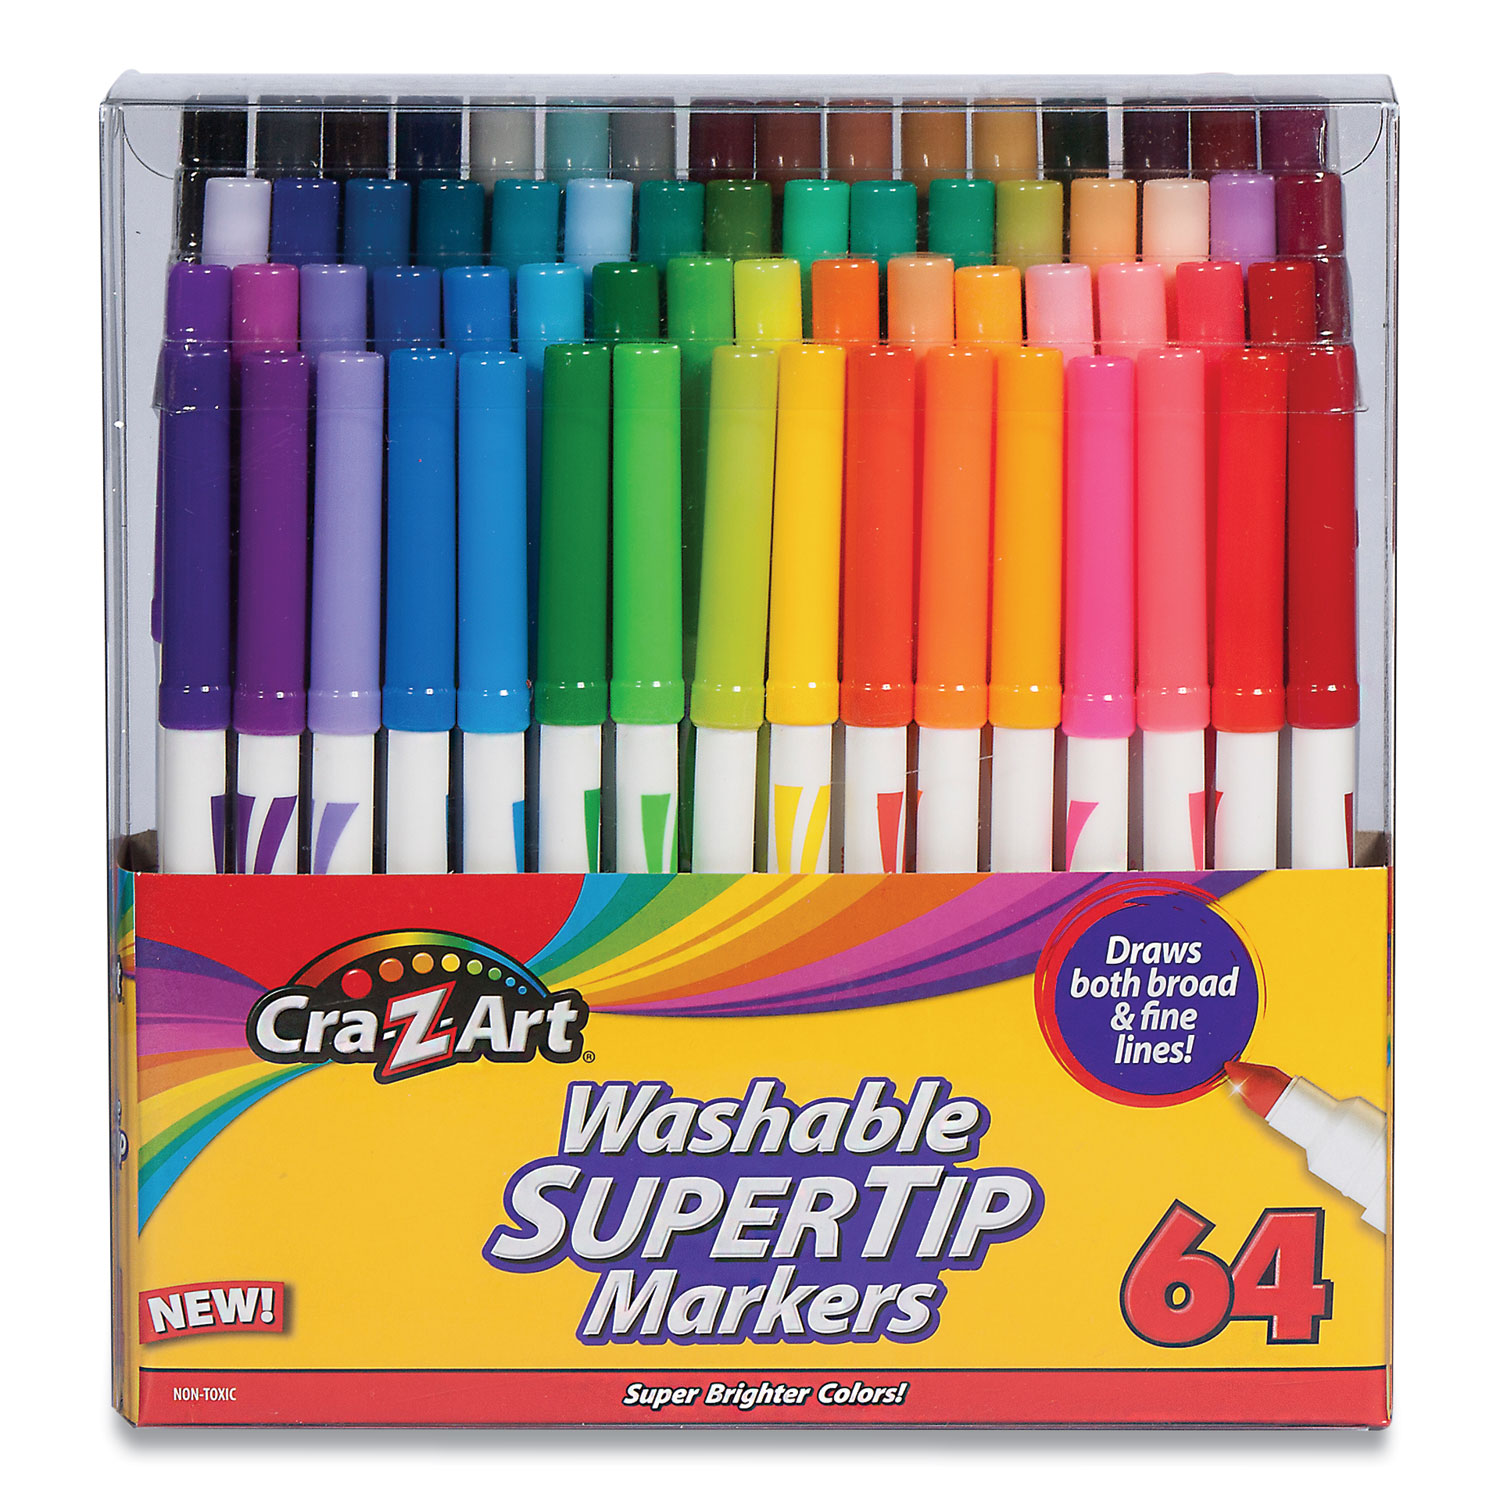 FREE SHIPPING Cra-z-art Supertip 20 Washable Markers, 20 Different